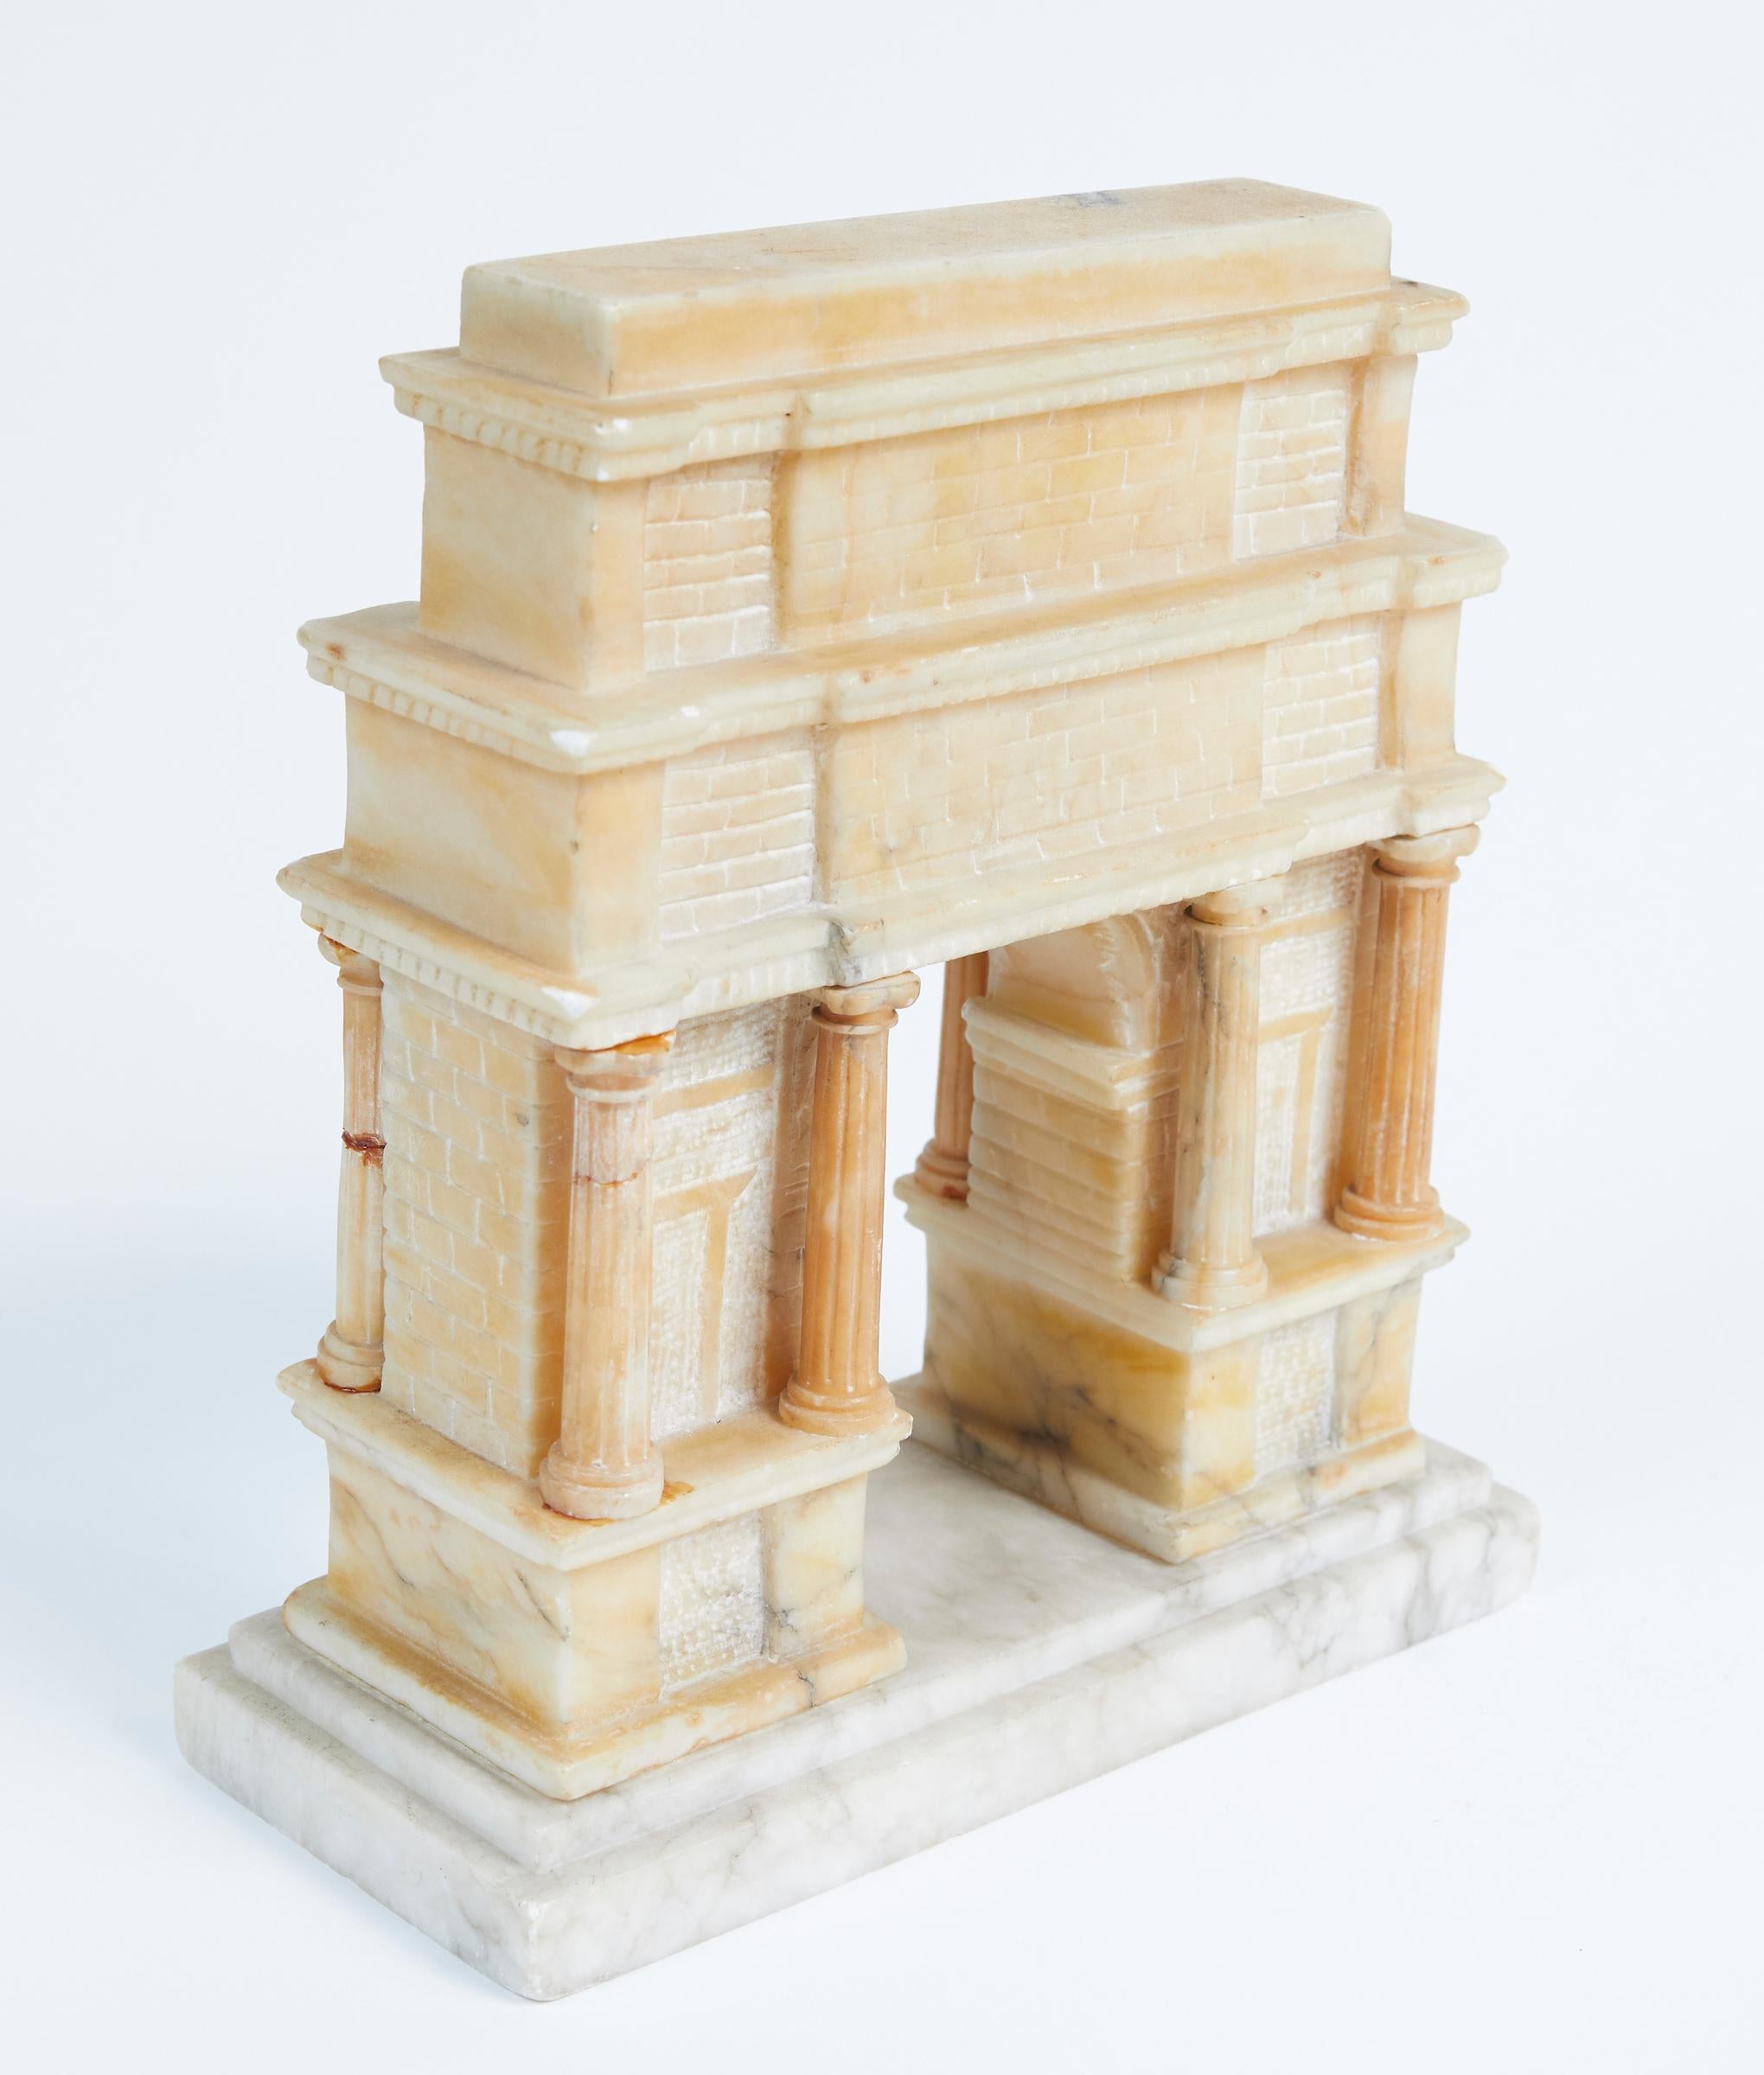 Italian 19th Century Carved Alabaster Grand Tour Model of Titus Arch in Rome